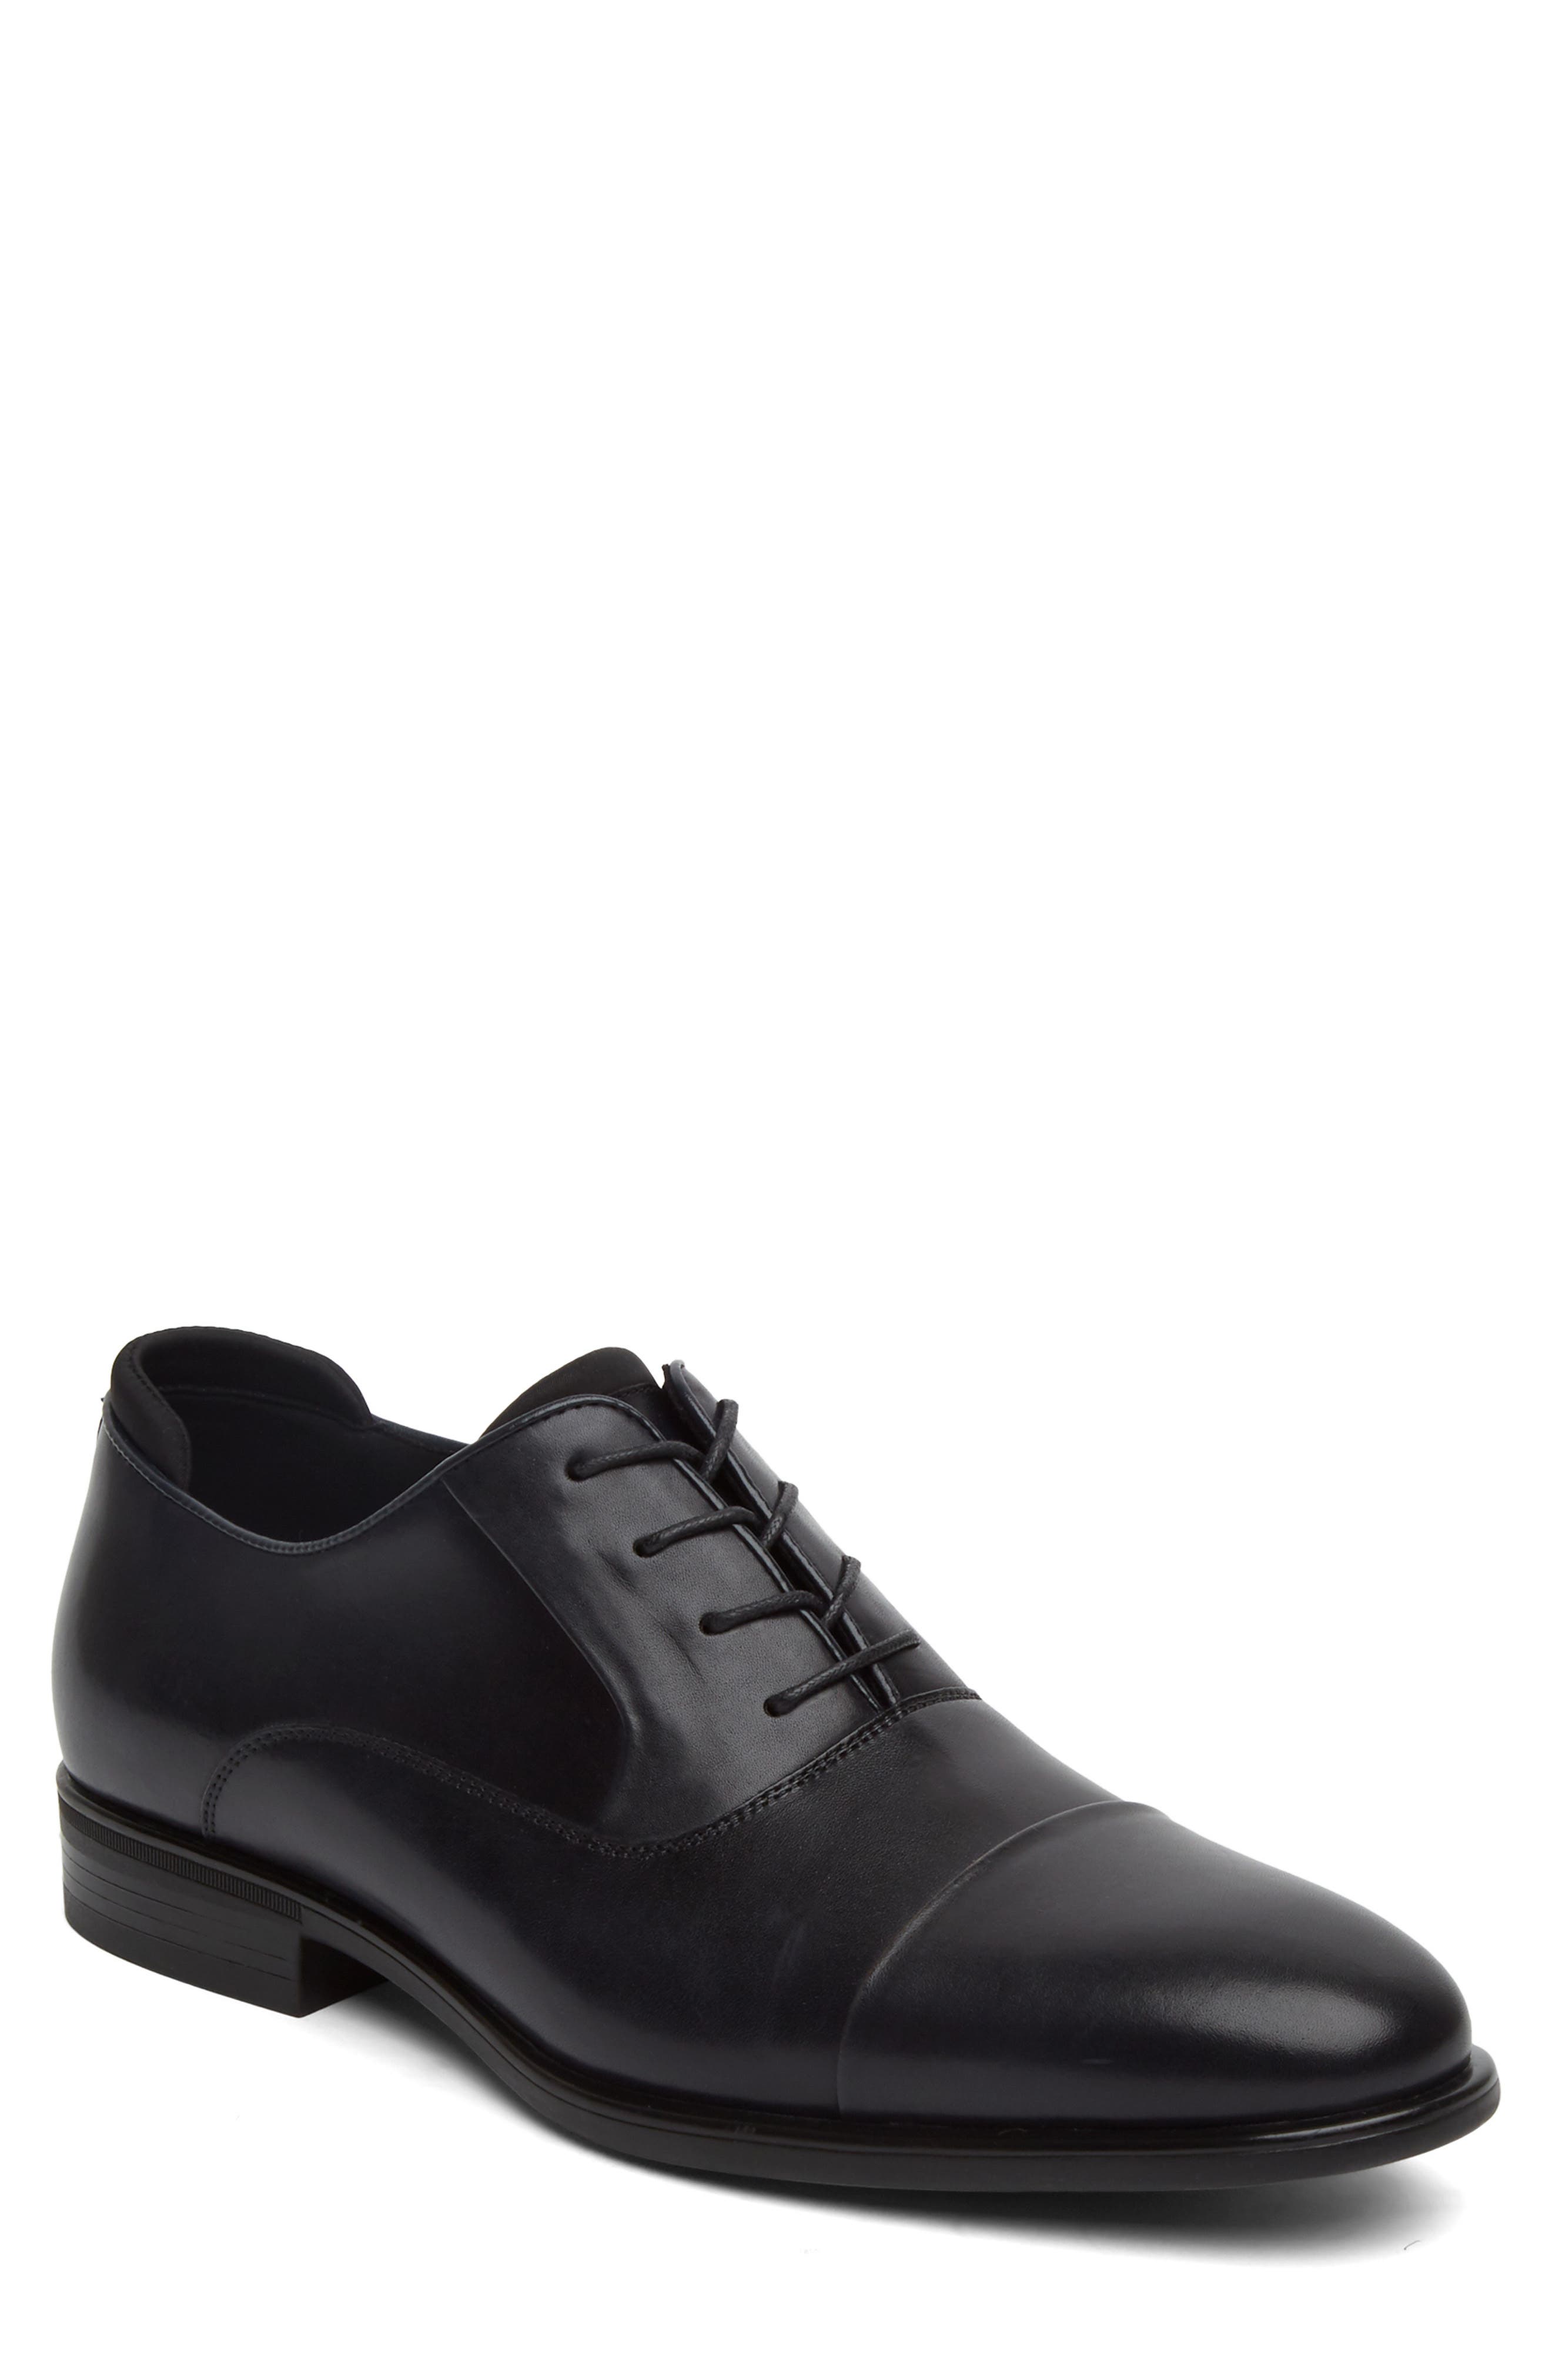 Kenneth Cole New York Mens Lesiure Time Oxford 